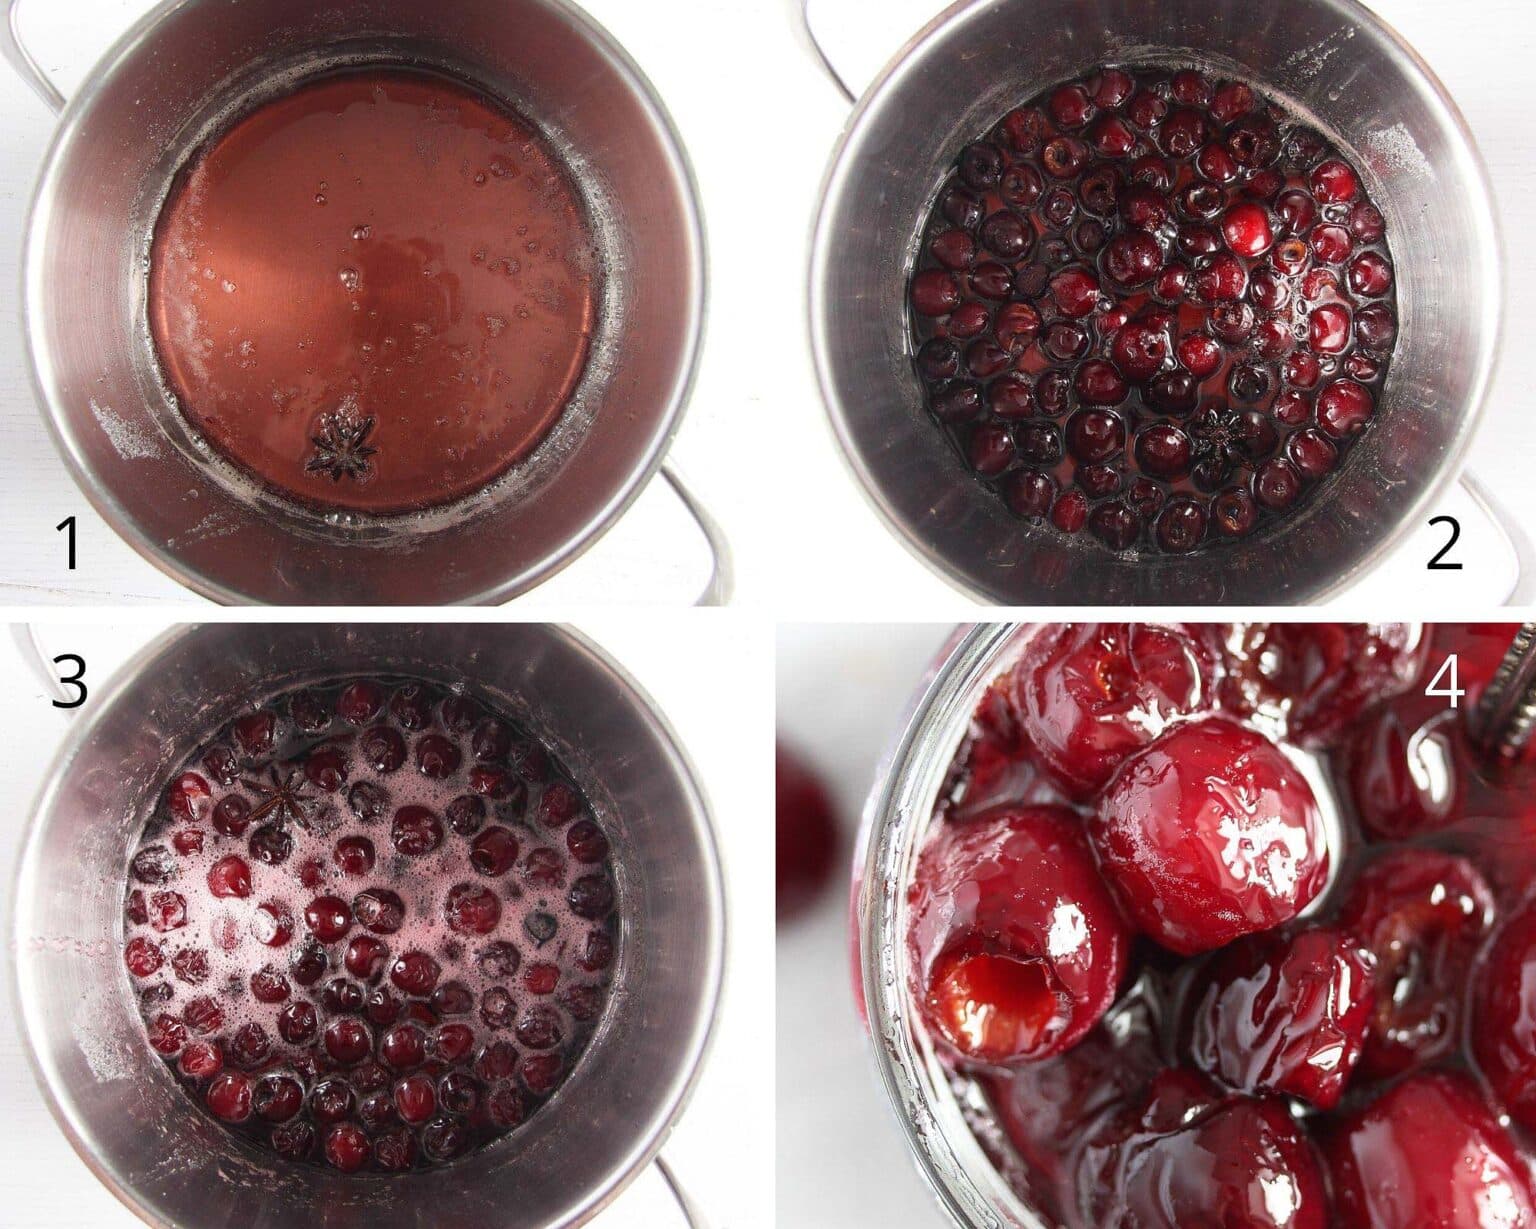 Cherries In Syrup Recipe Sweet Or Sour Cherries Where Is My Spoon